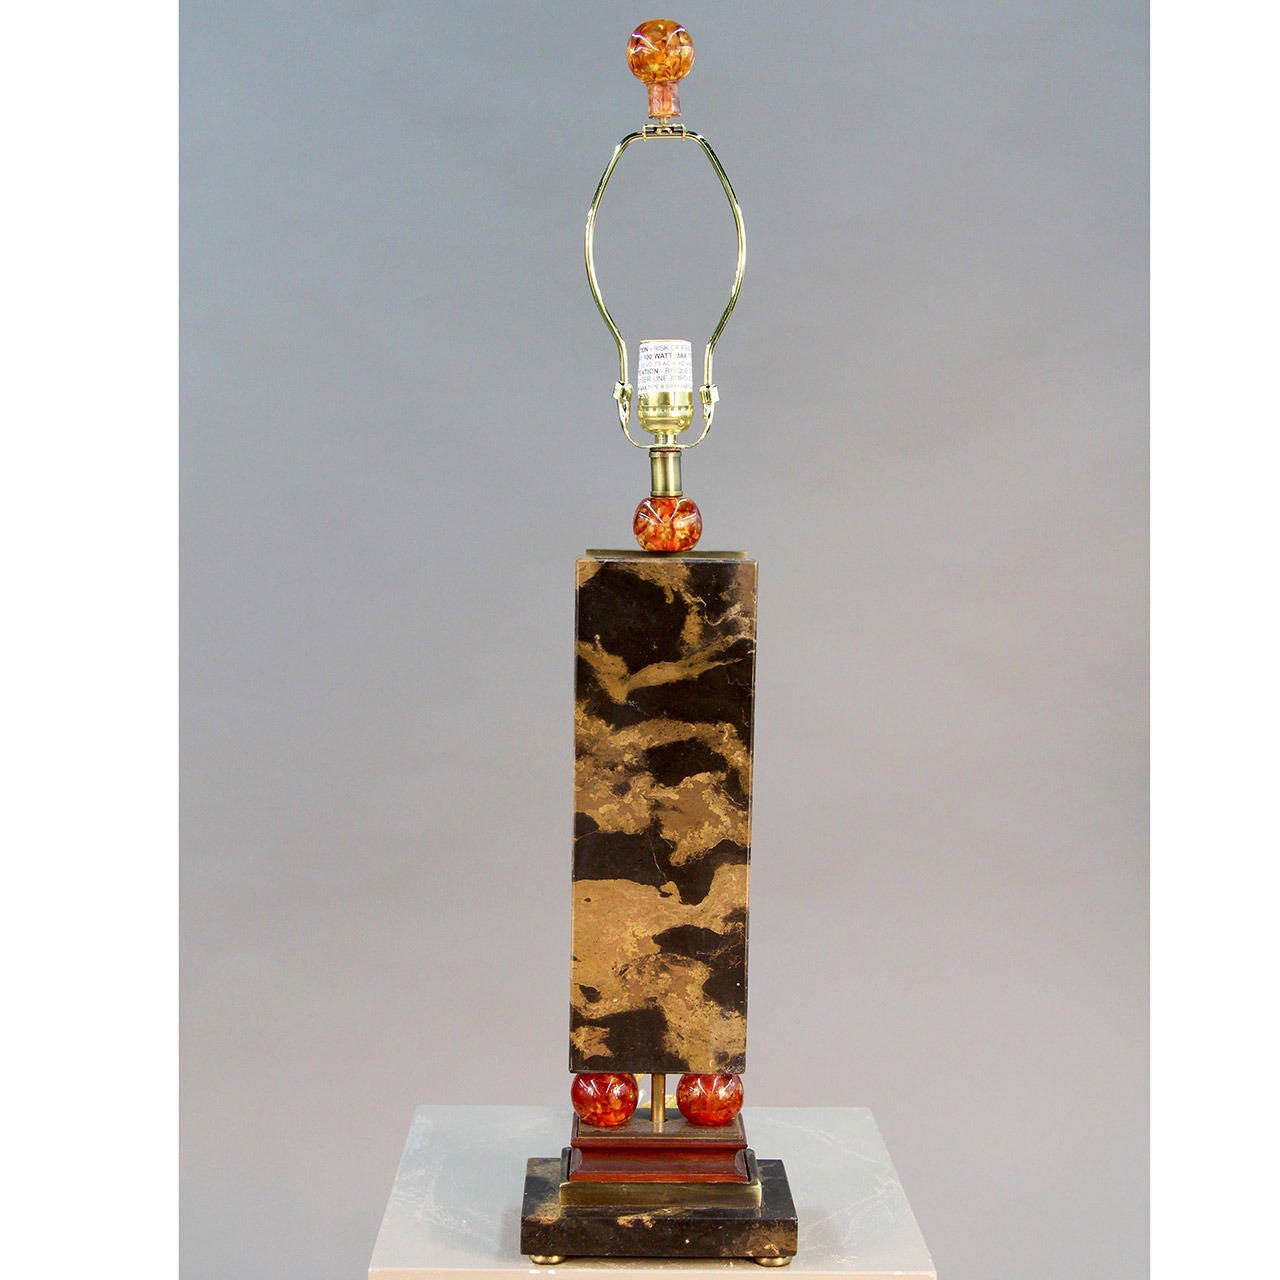 Unique tall marble table lamp with orange acrylic balls and bronze accents. New 14